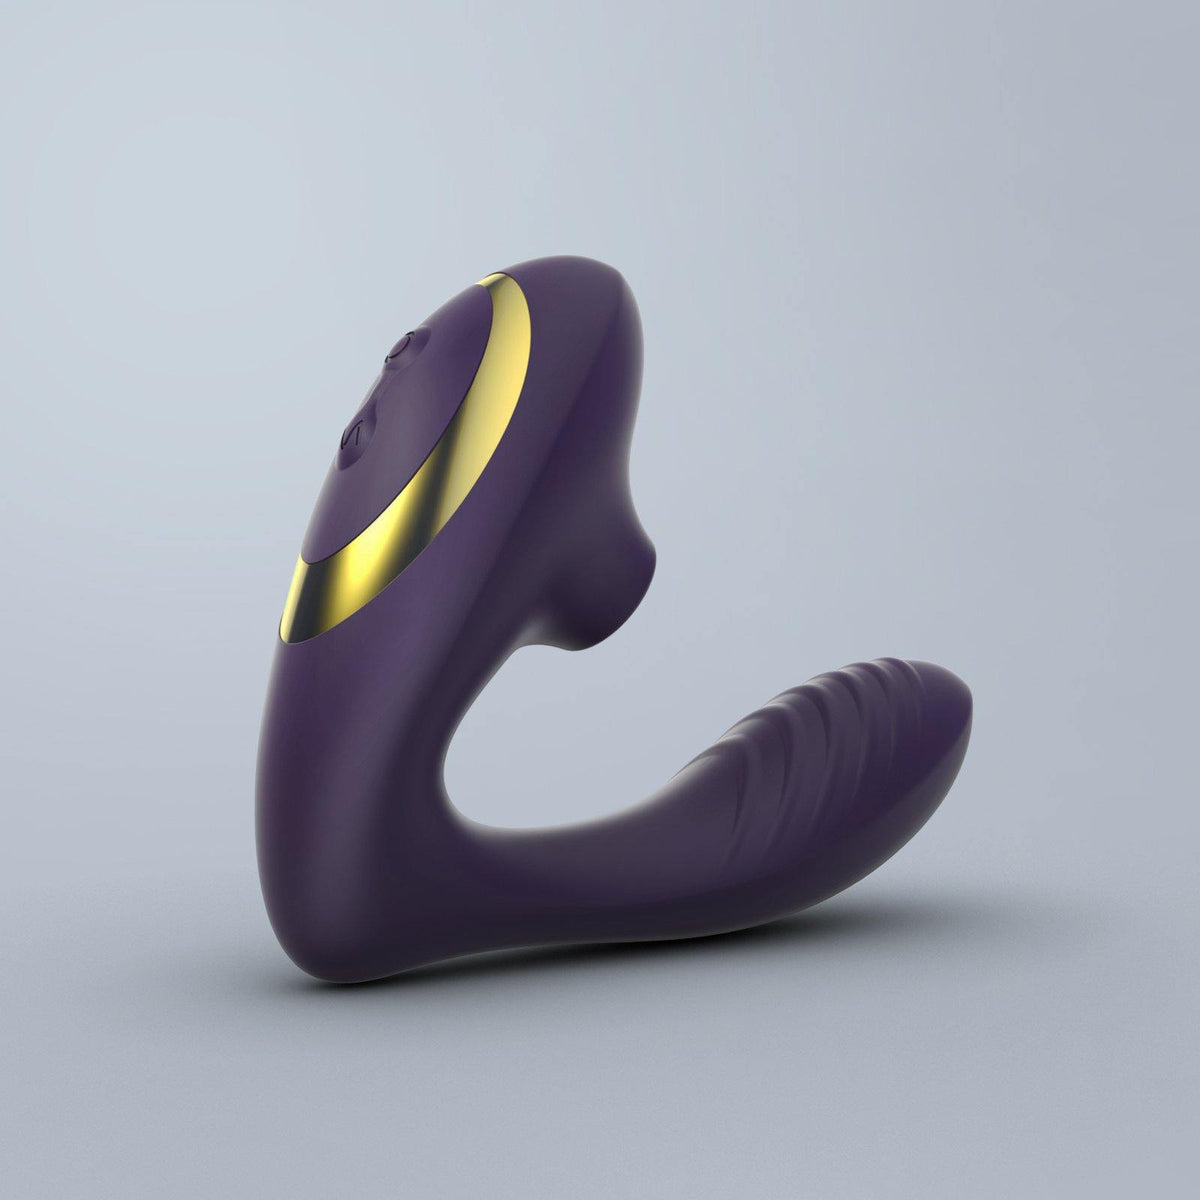 Tracy's Dog P. Cat Clitoral Sucking Vibrator for Clit Nipple Stimulation  with 10 Suction Modes, Adult Oral Sex Toys for Women Couples - Discreet